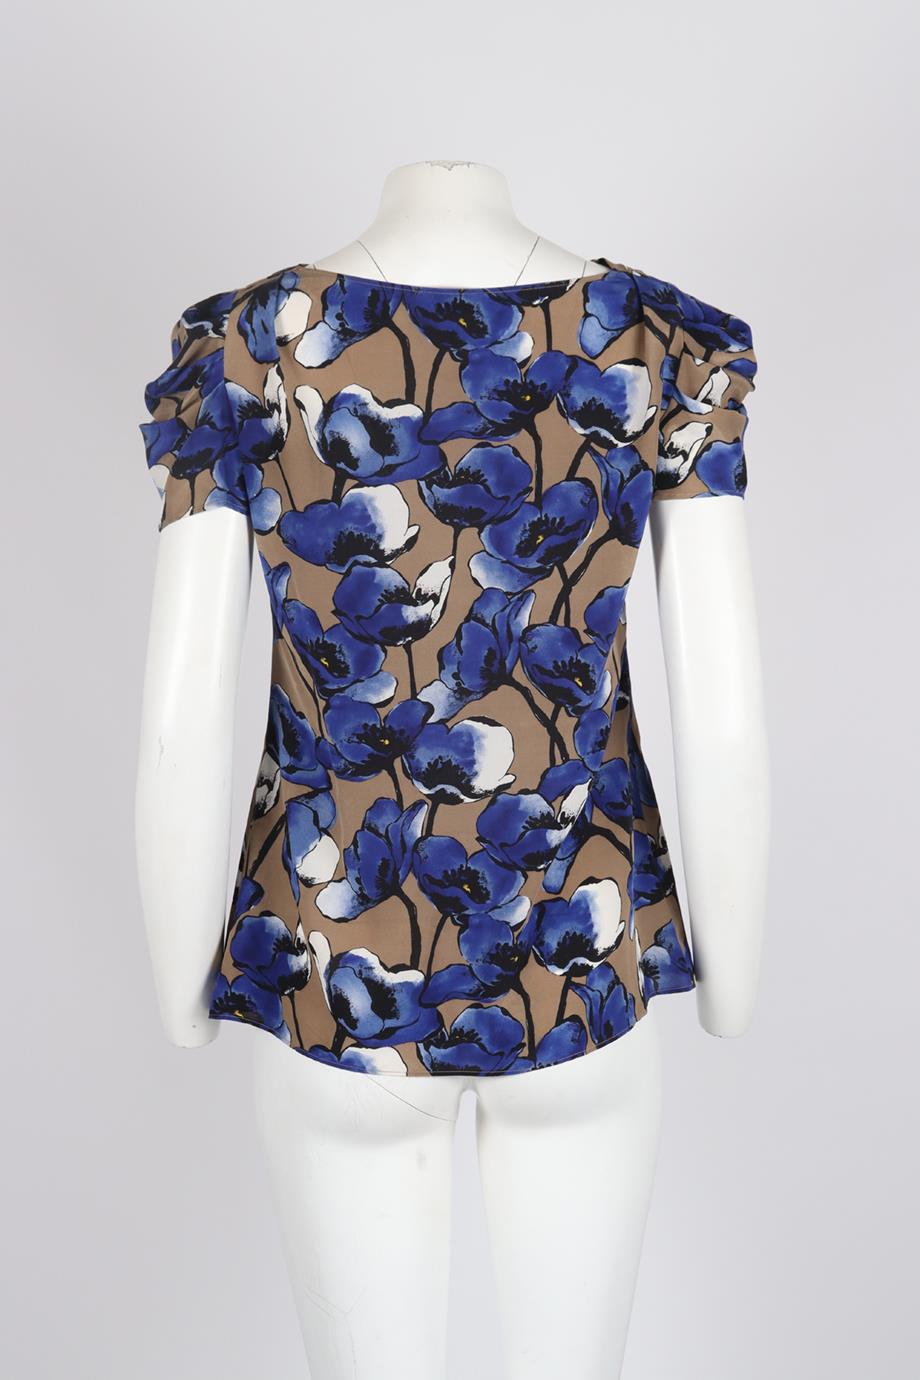 MOSCHINO CHEAP AND CHIC DRAPED FLORAL PRINT SILK BLOUSE IT 44 UK 12